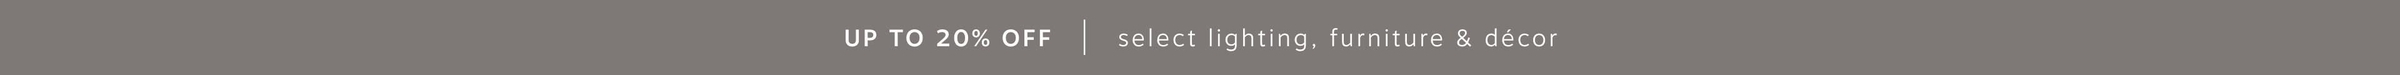 Up to 20% off select lighting, furniture & decor - Scout & Nimble